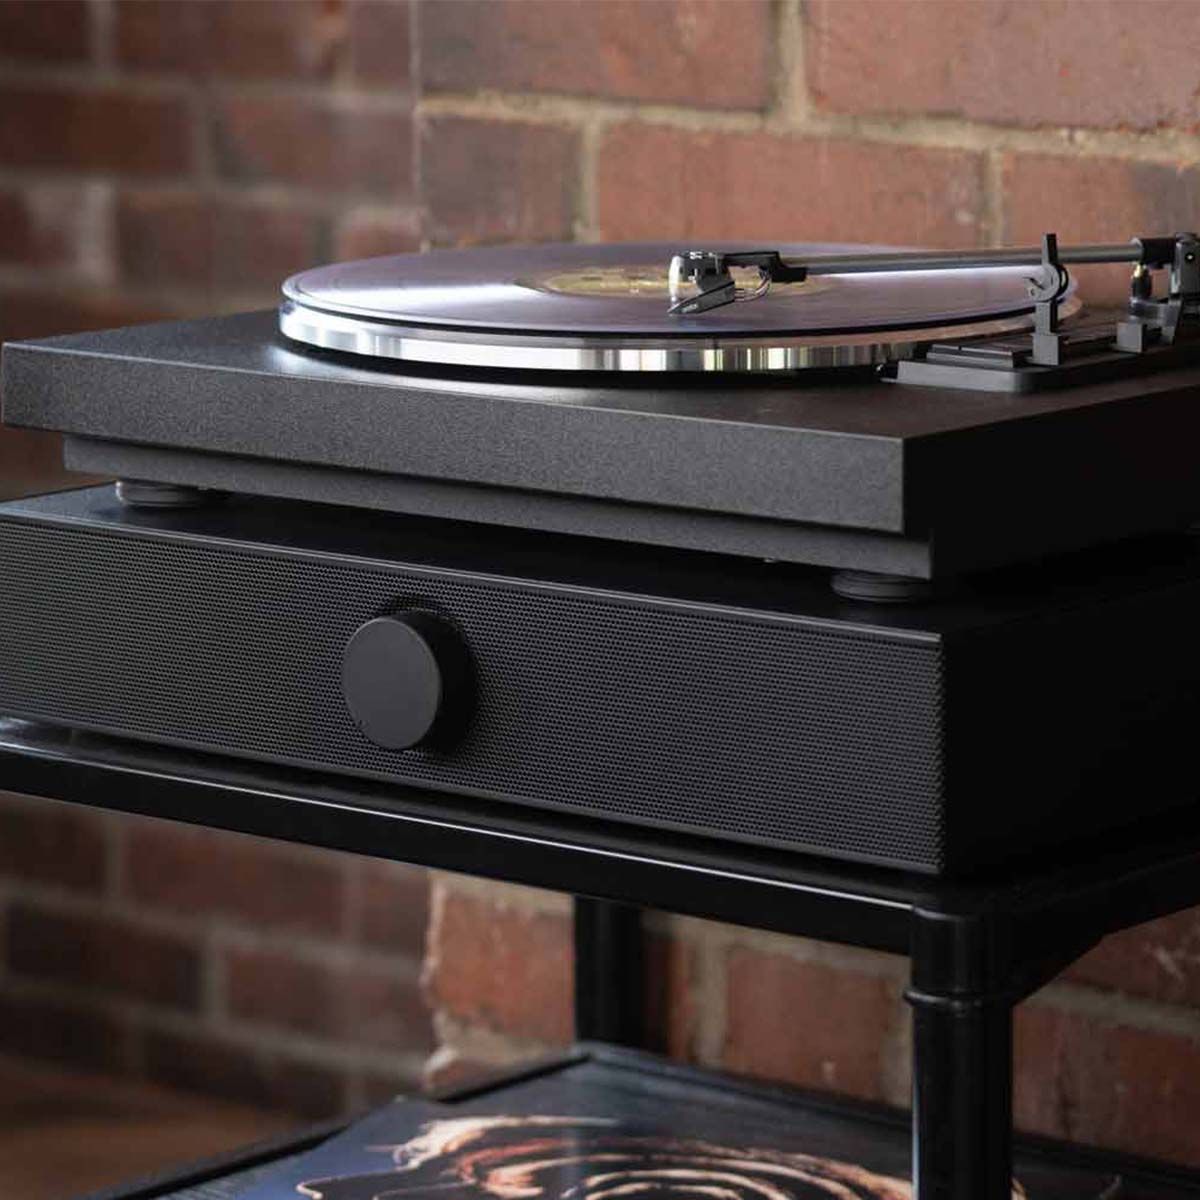 Andover SpinDeck Max Turntable, Black, detailed view on top of SpinBase